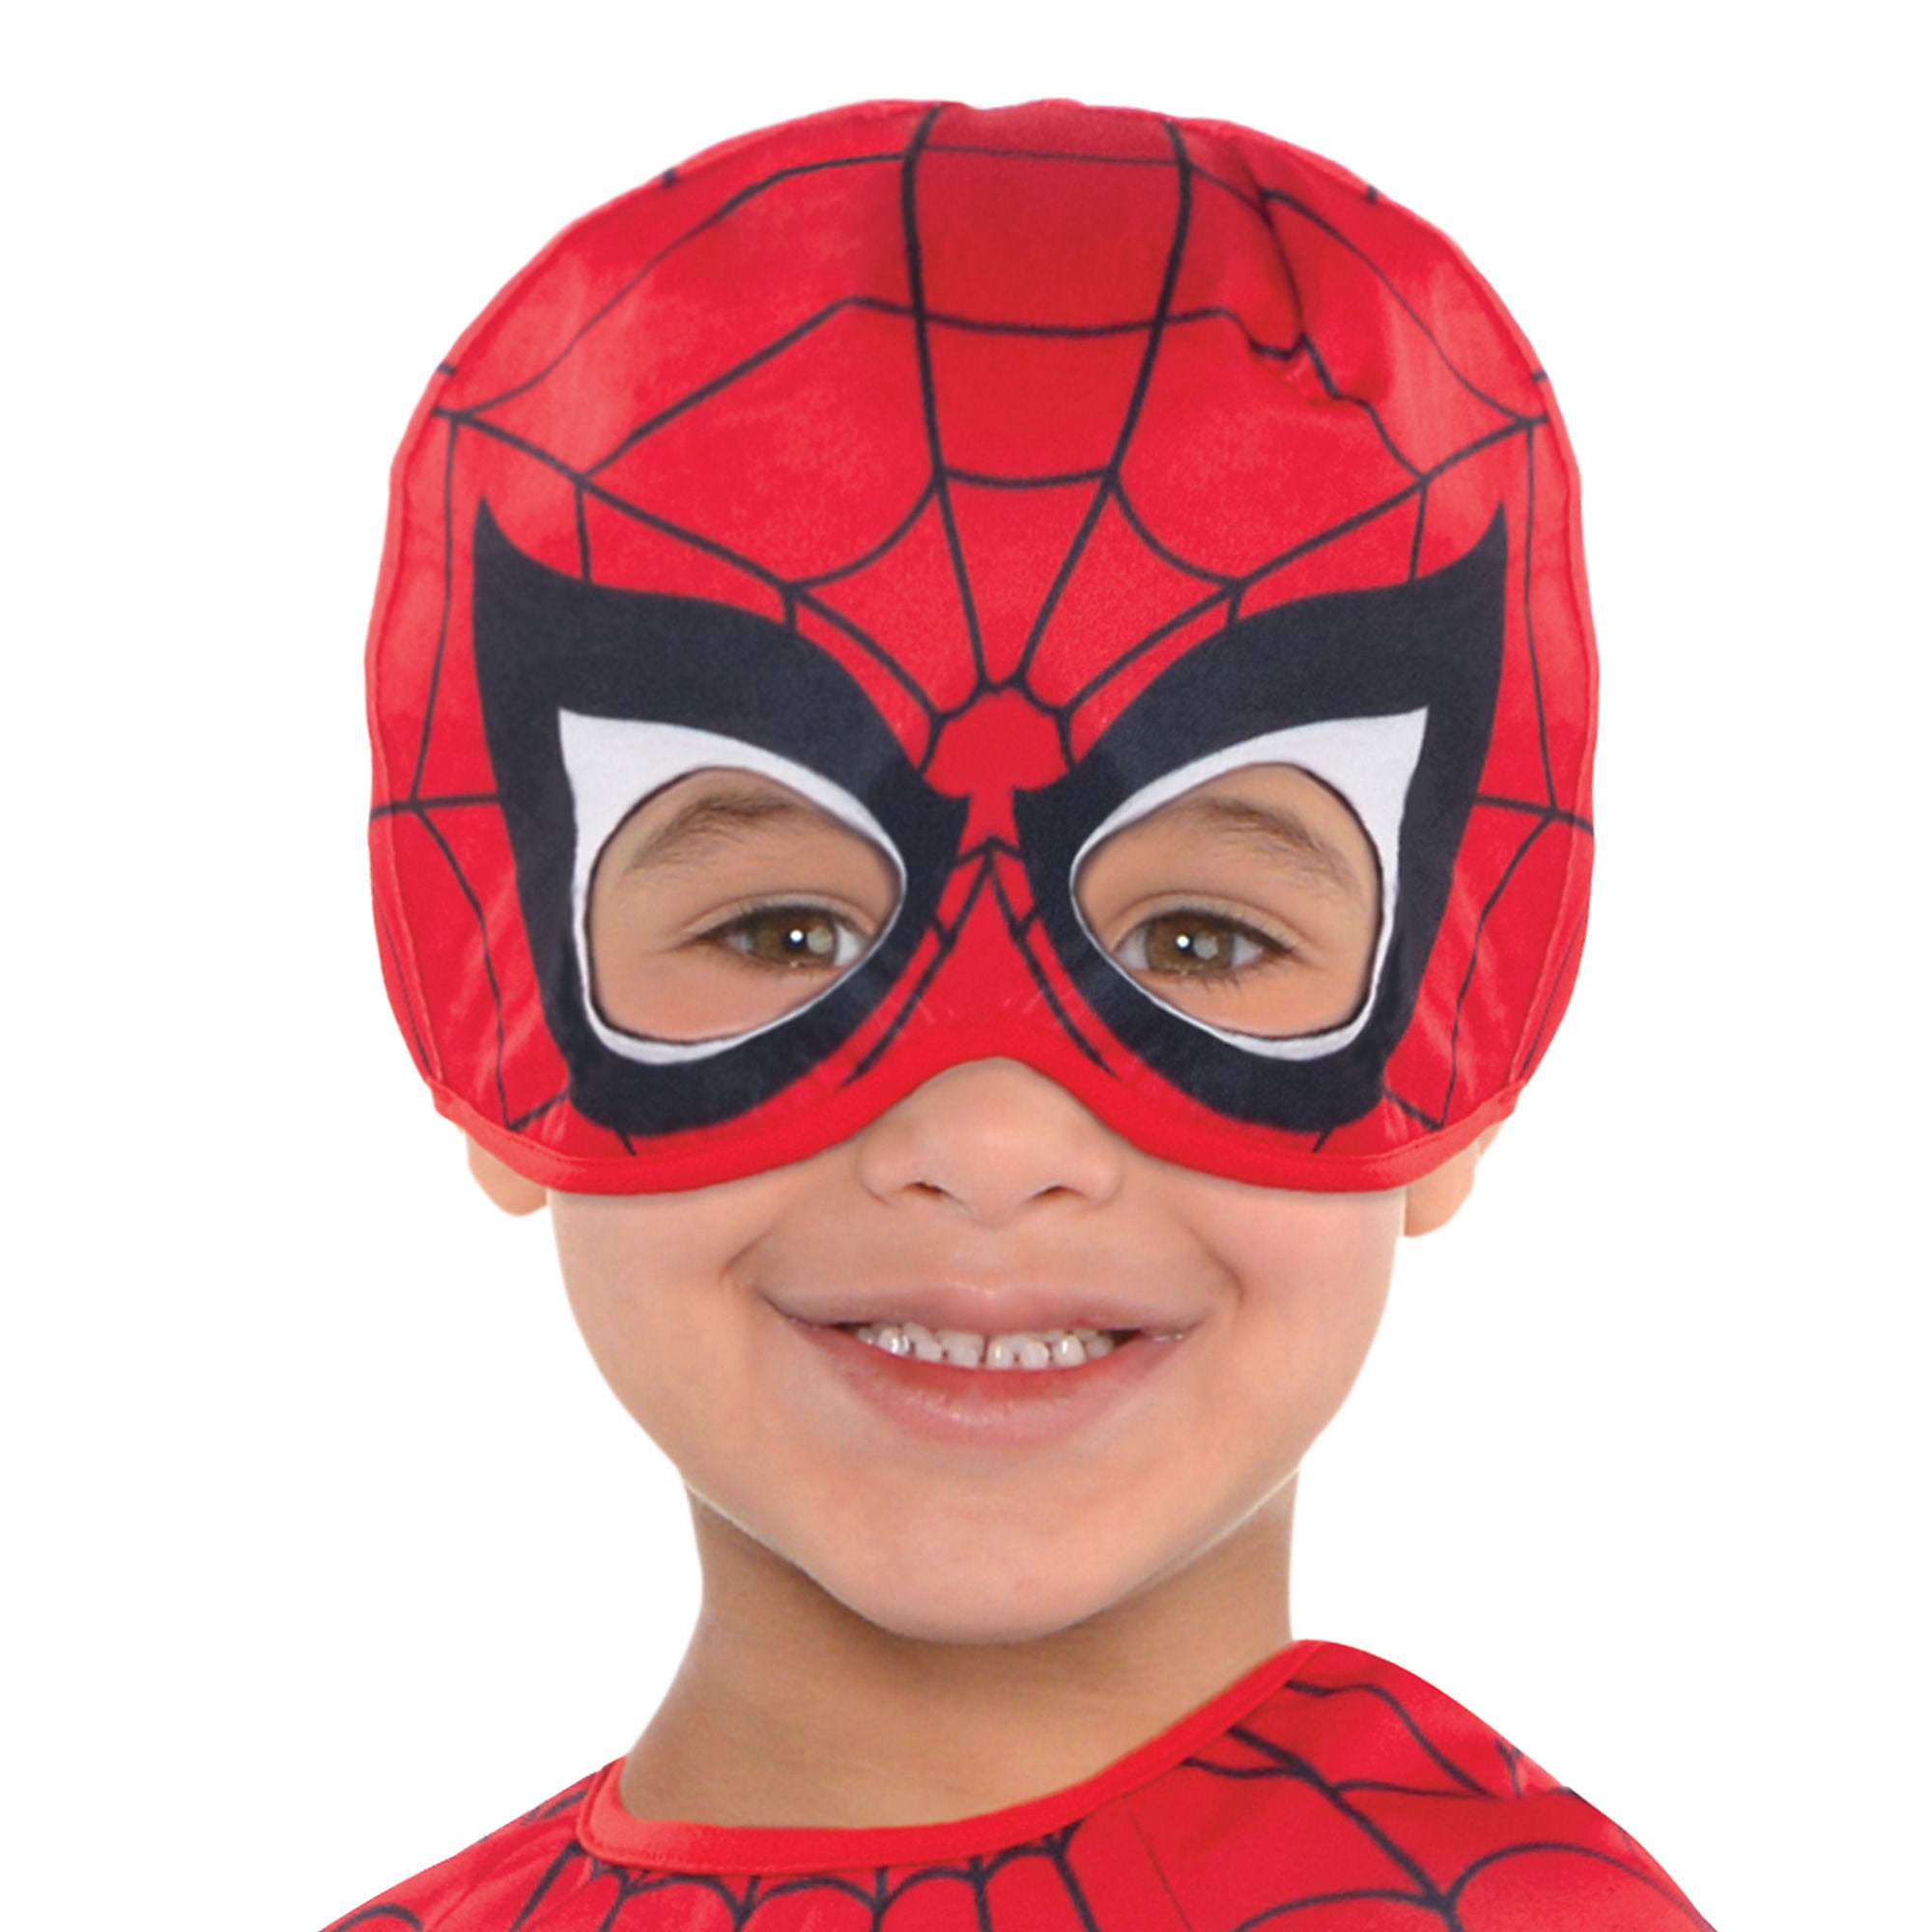 Suit Yourself Classic Spider-Man Muscle Halloween Costume for Toddler Boys Includes Headpiece 3-4T